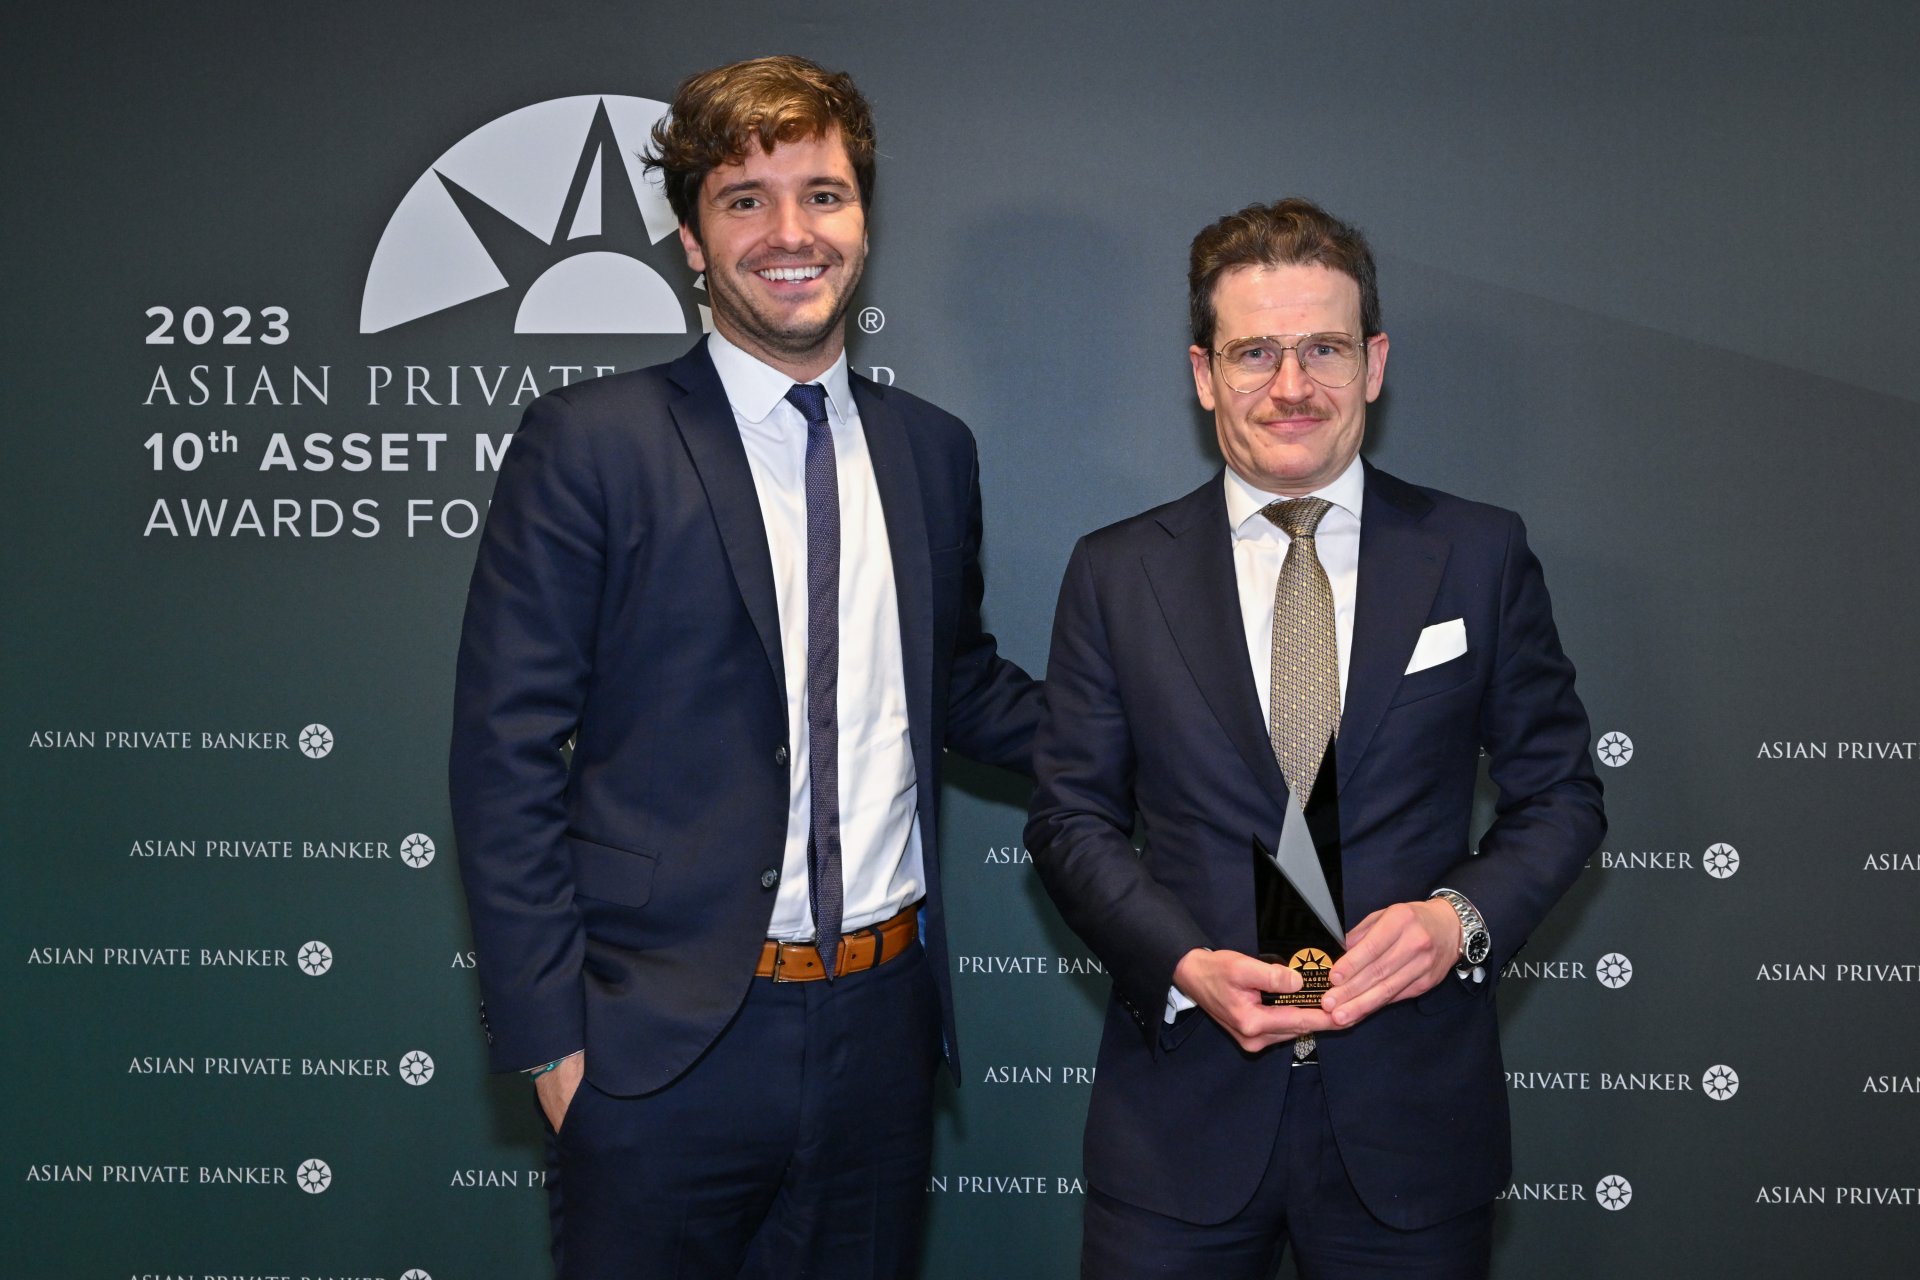 Accepting Best Fund Provider - ESG:Sustainable Equity at Asian Private Banker’s 10th Asset Management Awards for Excellence is Quentin Dunyach and Guenter Tschiderer